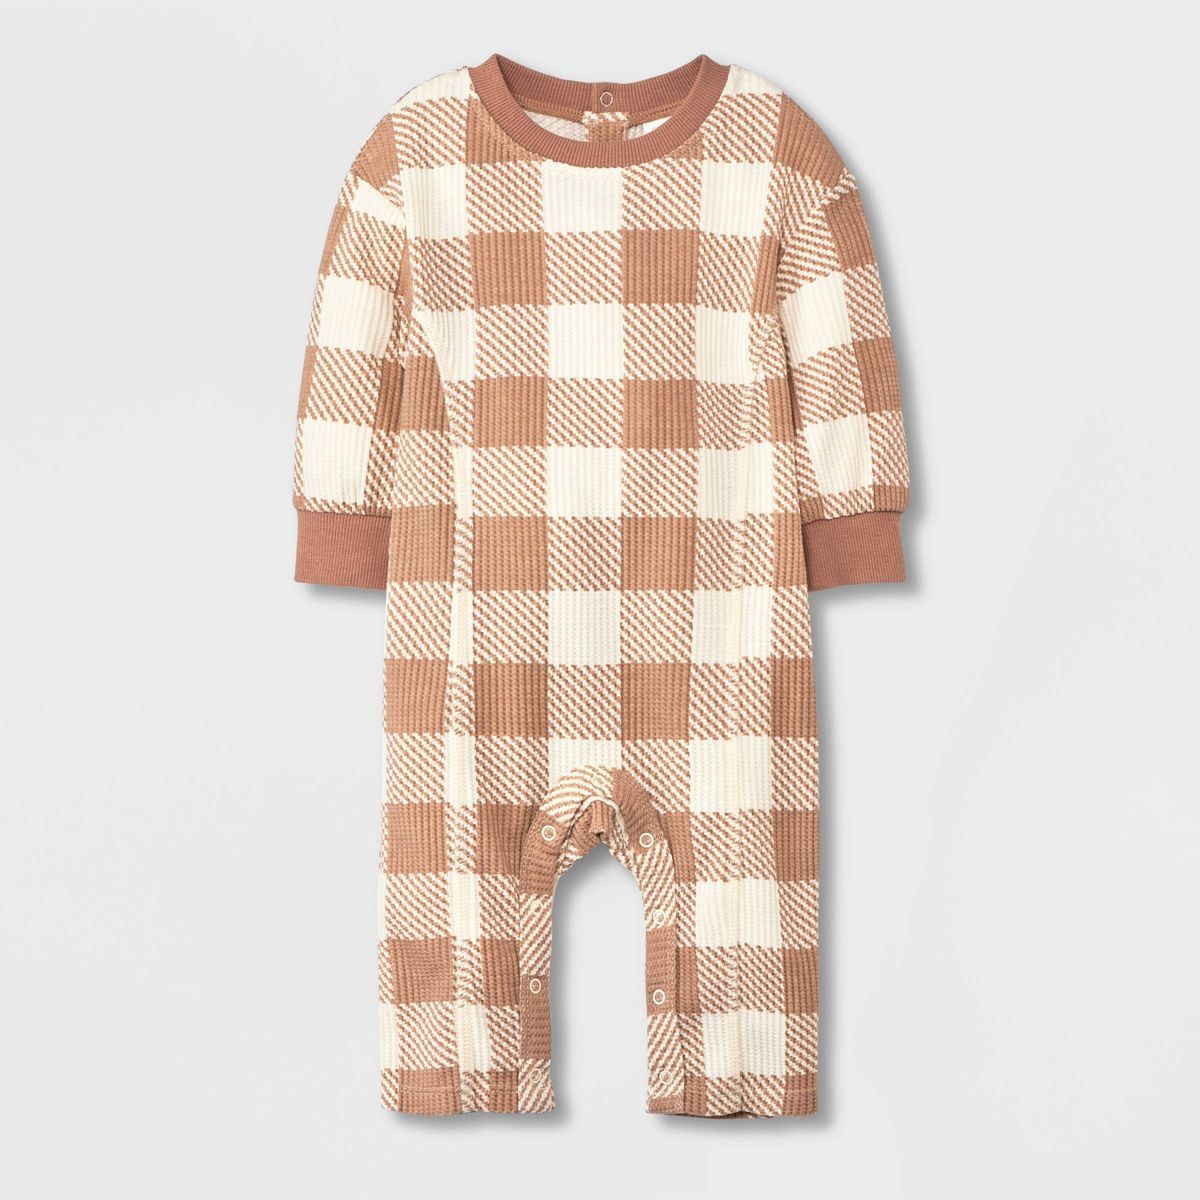 Grayson Collective Baby Boys' Seamed Romper - Brown | Target